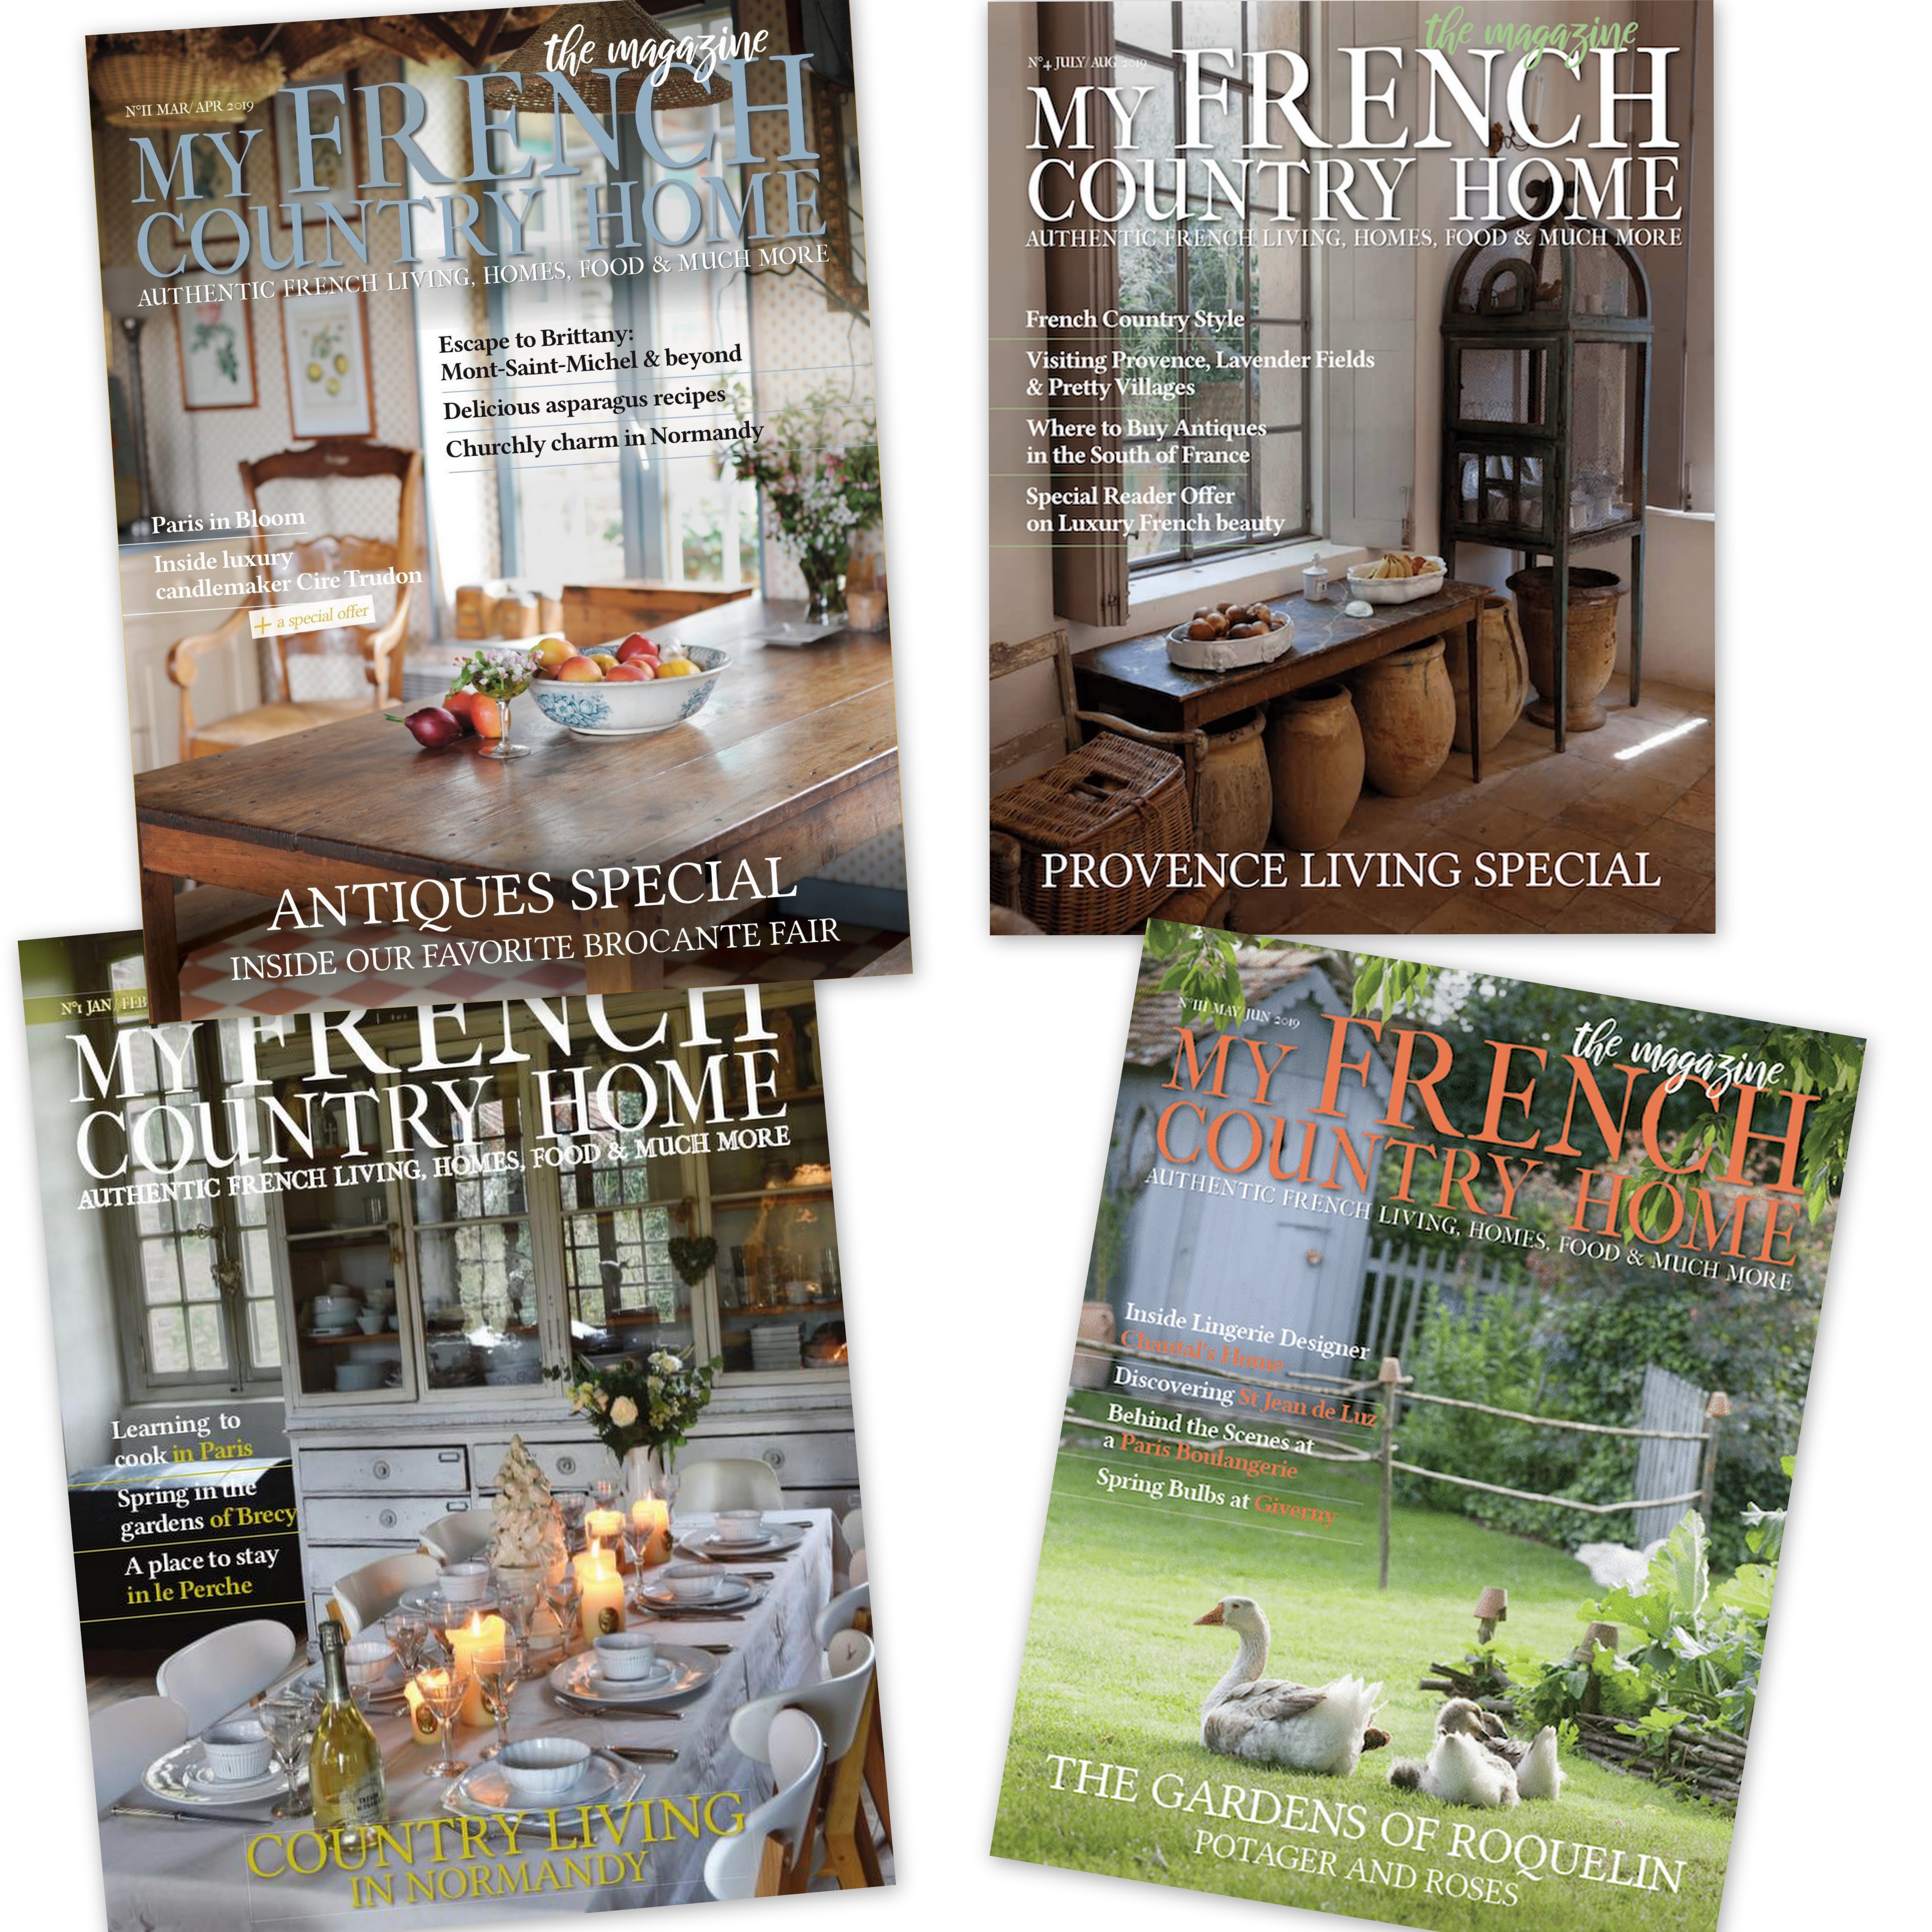 A Year’s Subscription to My French Country Home Magazine, Giveaway